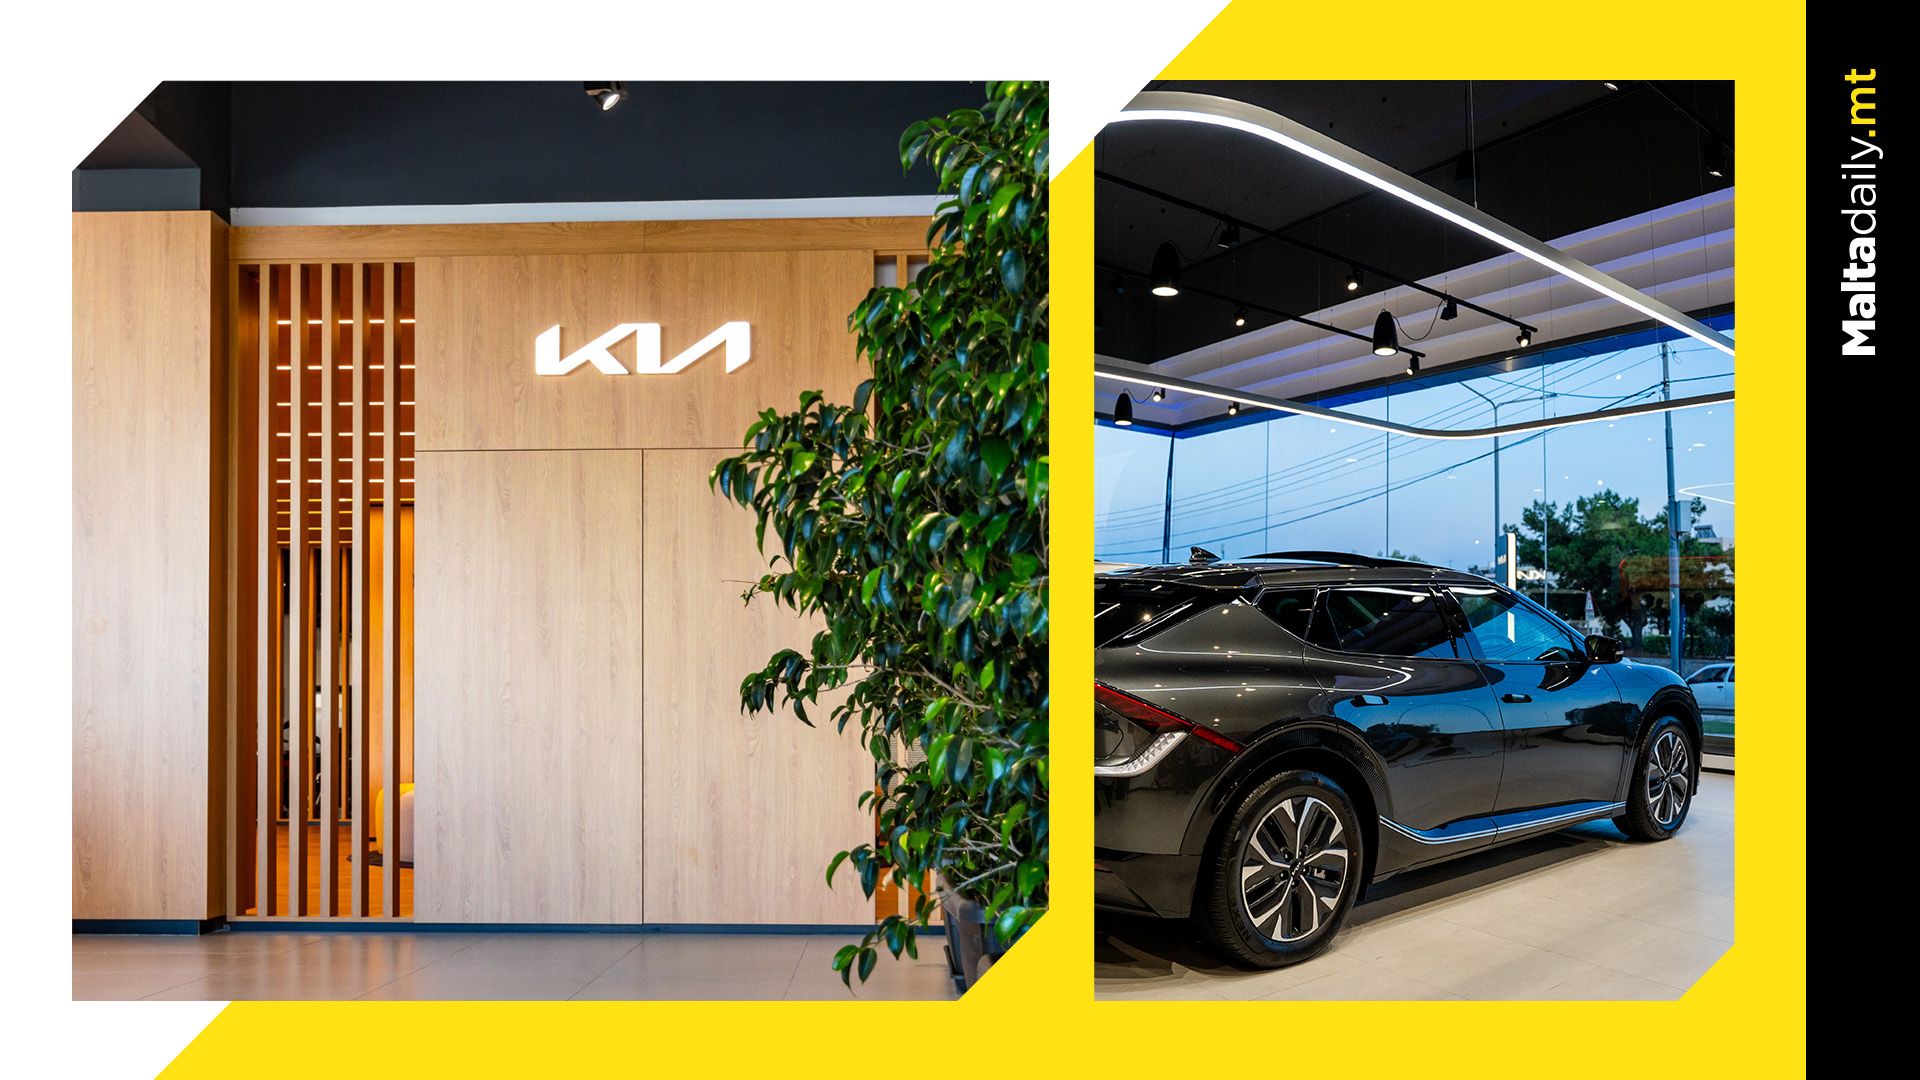 Kia Malta's Showroom: A New Chapter in the Brand’s Exciting Journey